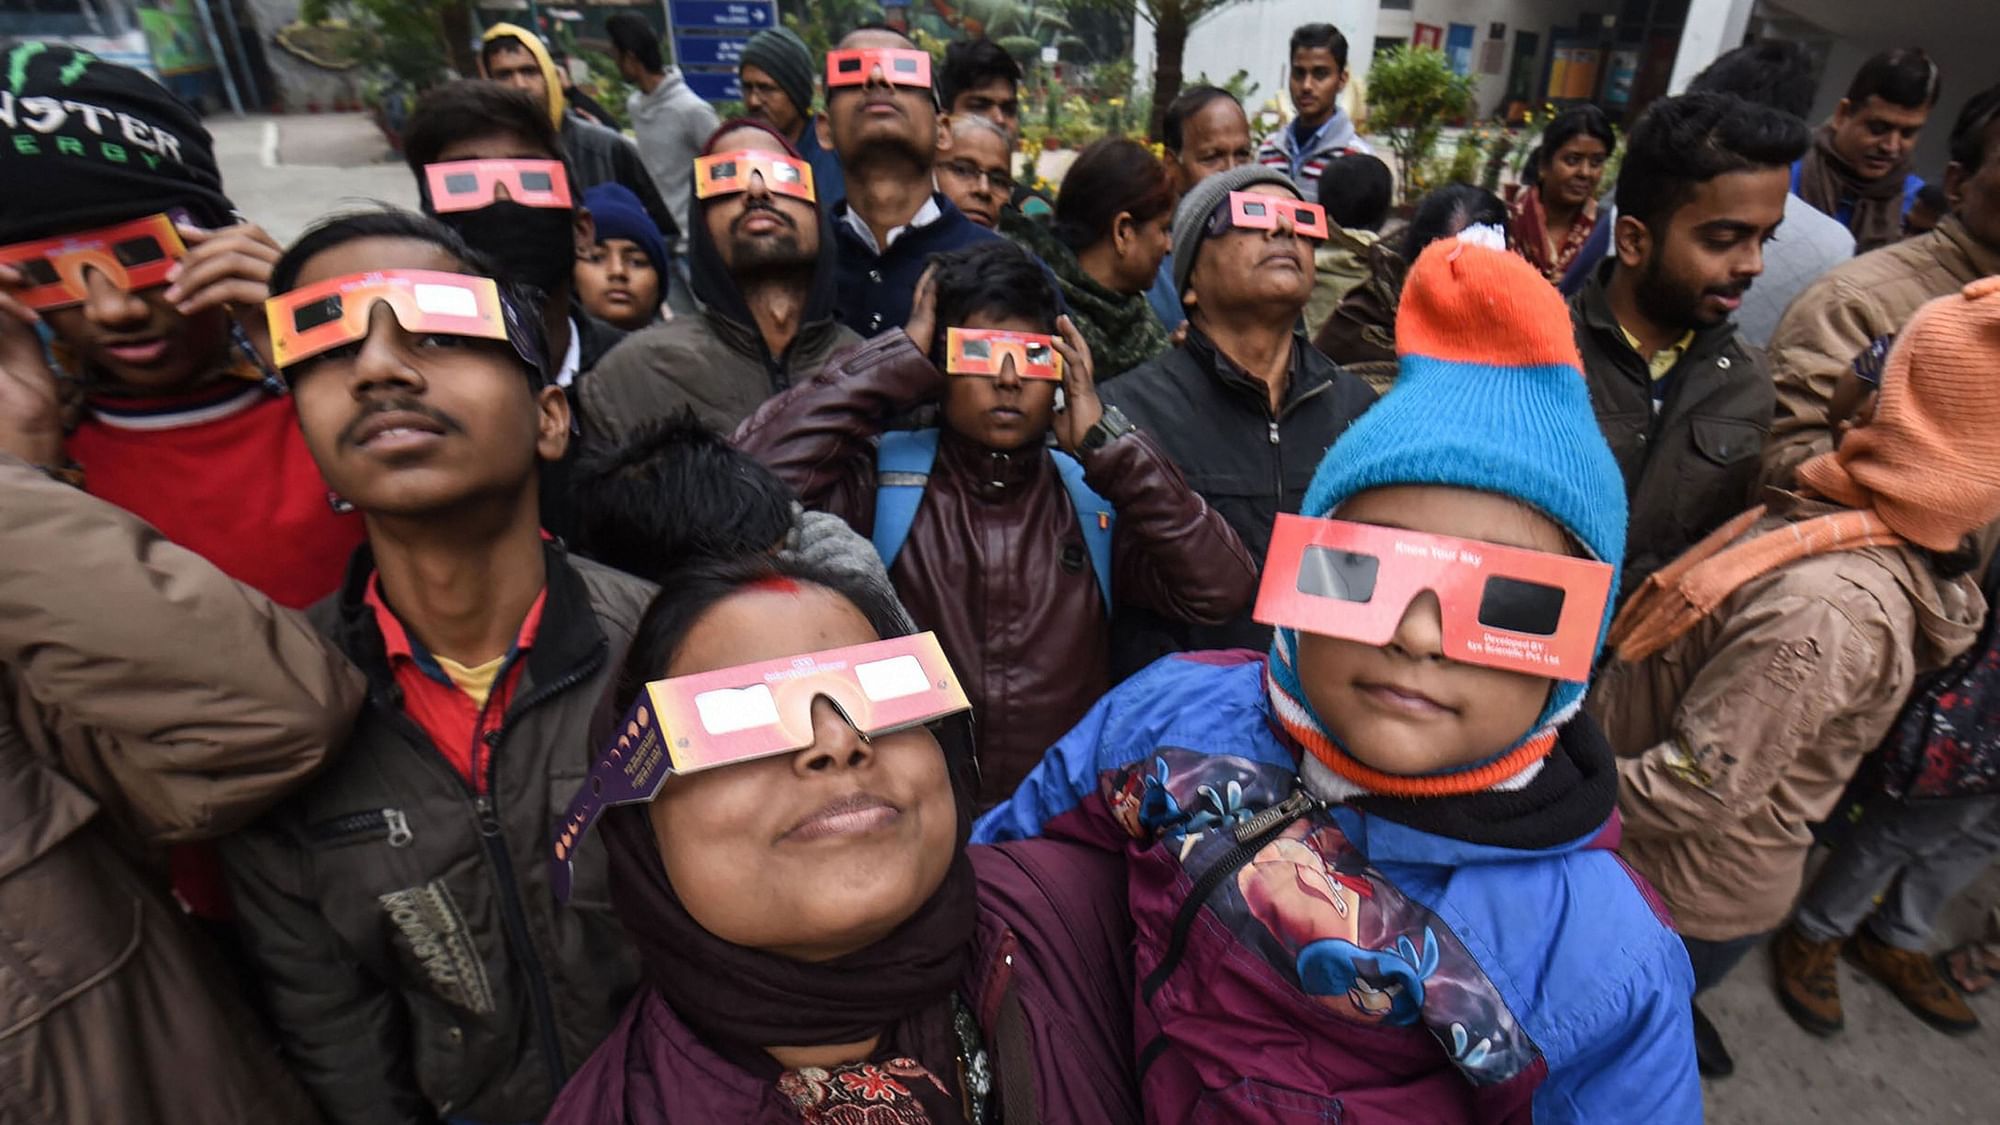 Surya Garhan 21 June 2020 Time in India: The first solar eclipse of the year will occur on 21 June. Check out the timings and how to watch it safely.